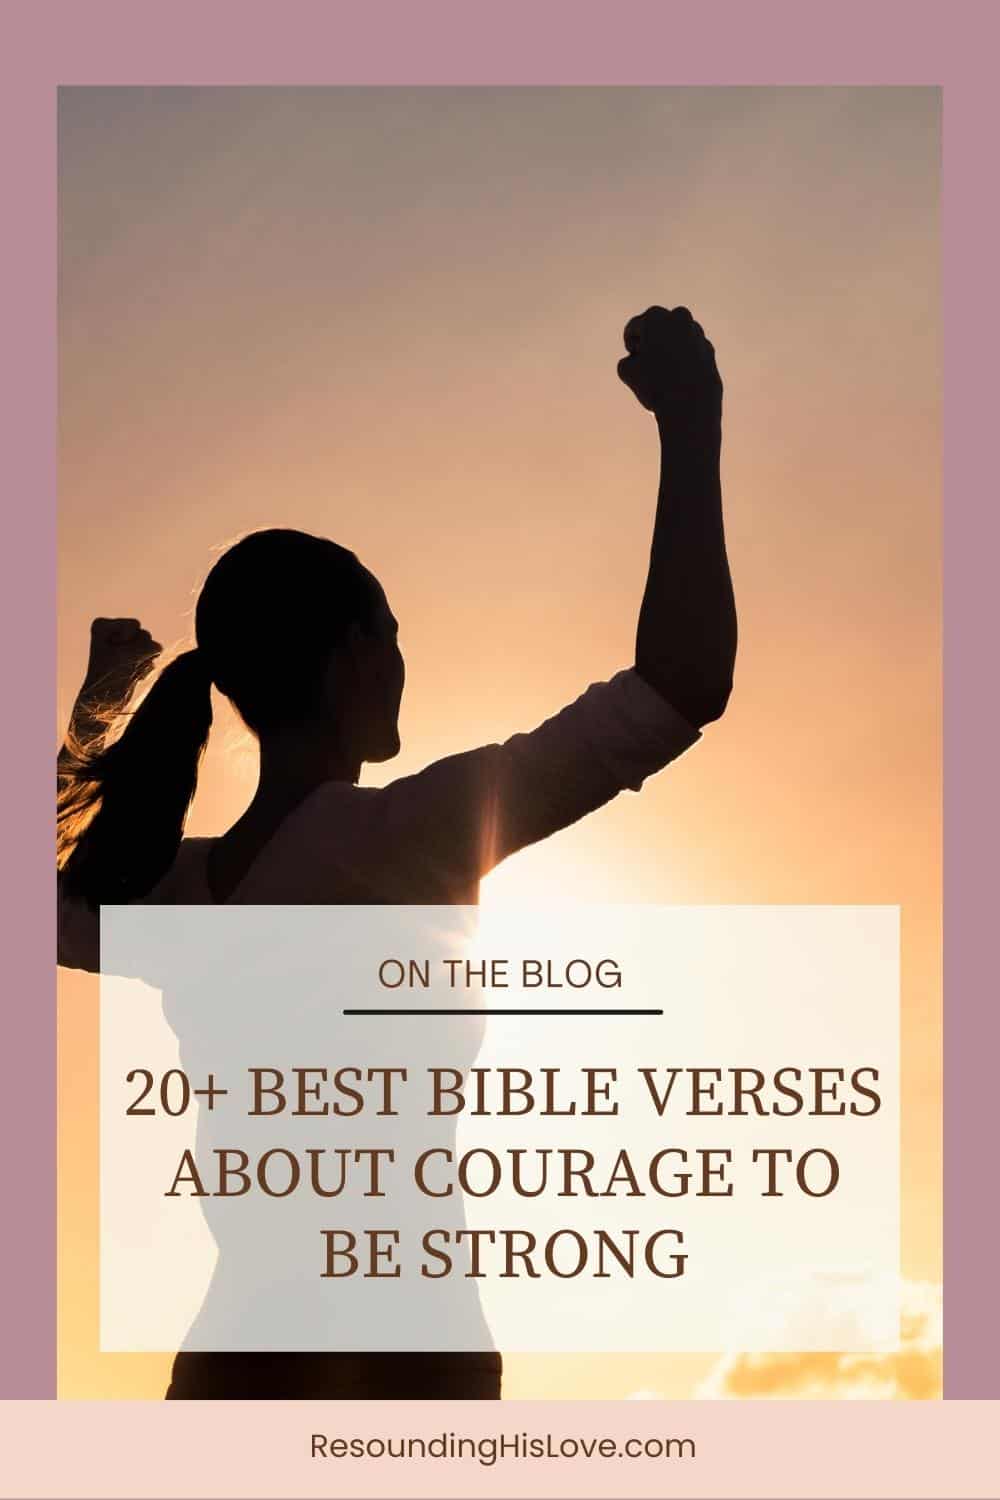 20+ Best Amazing Bible Verses About Courage To Be Strong